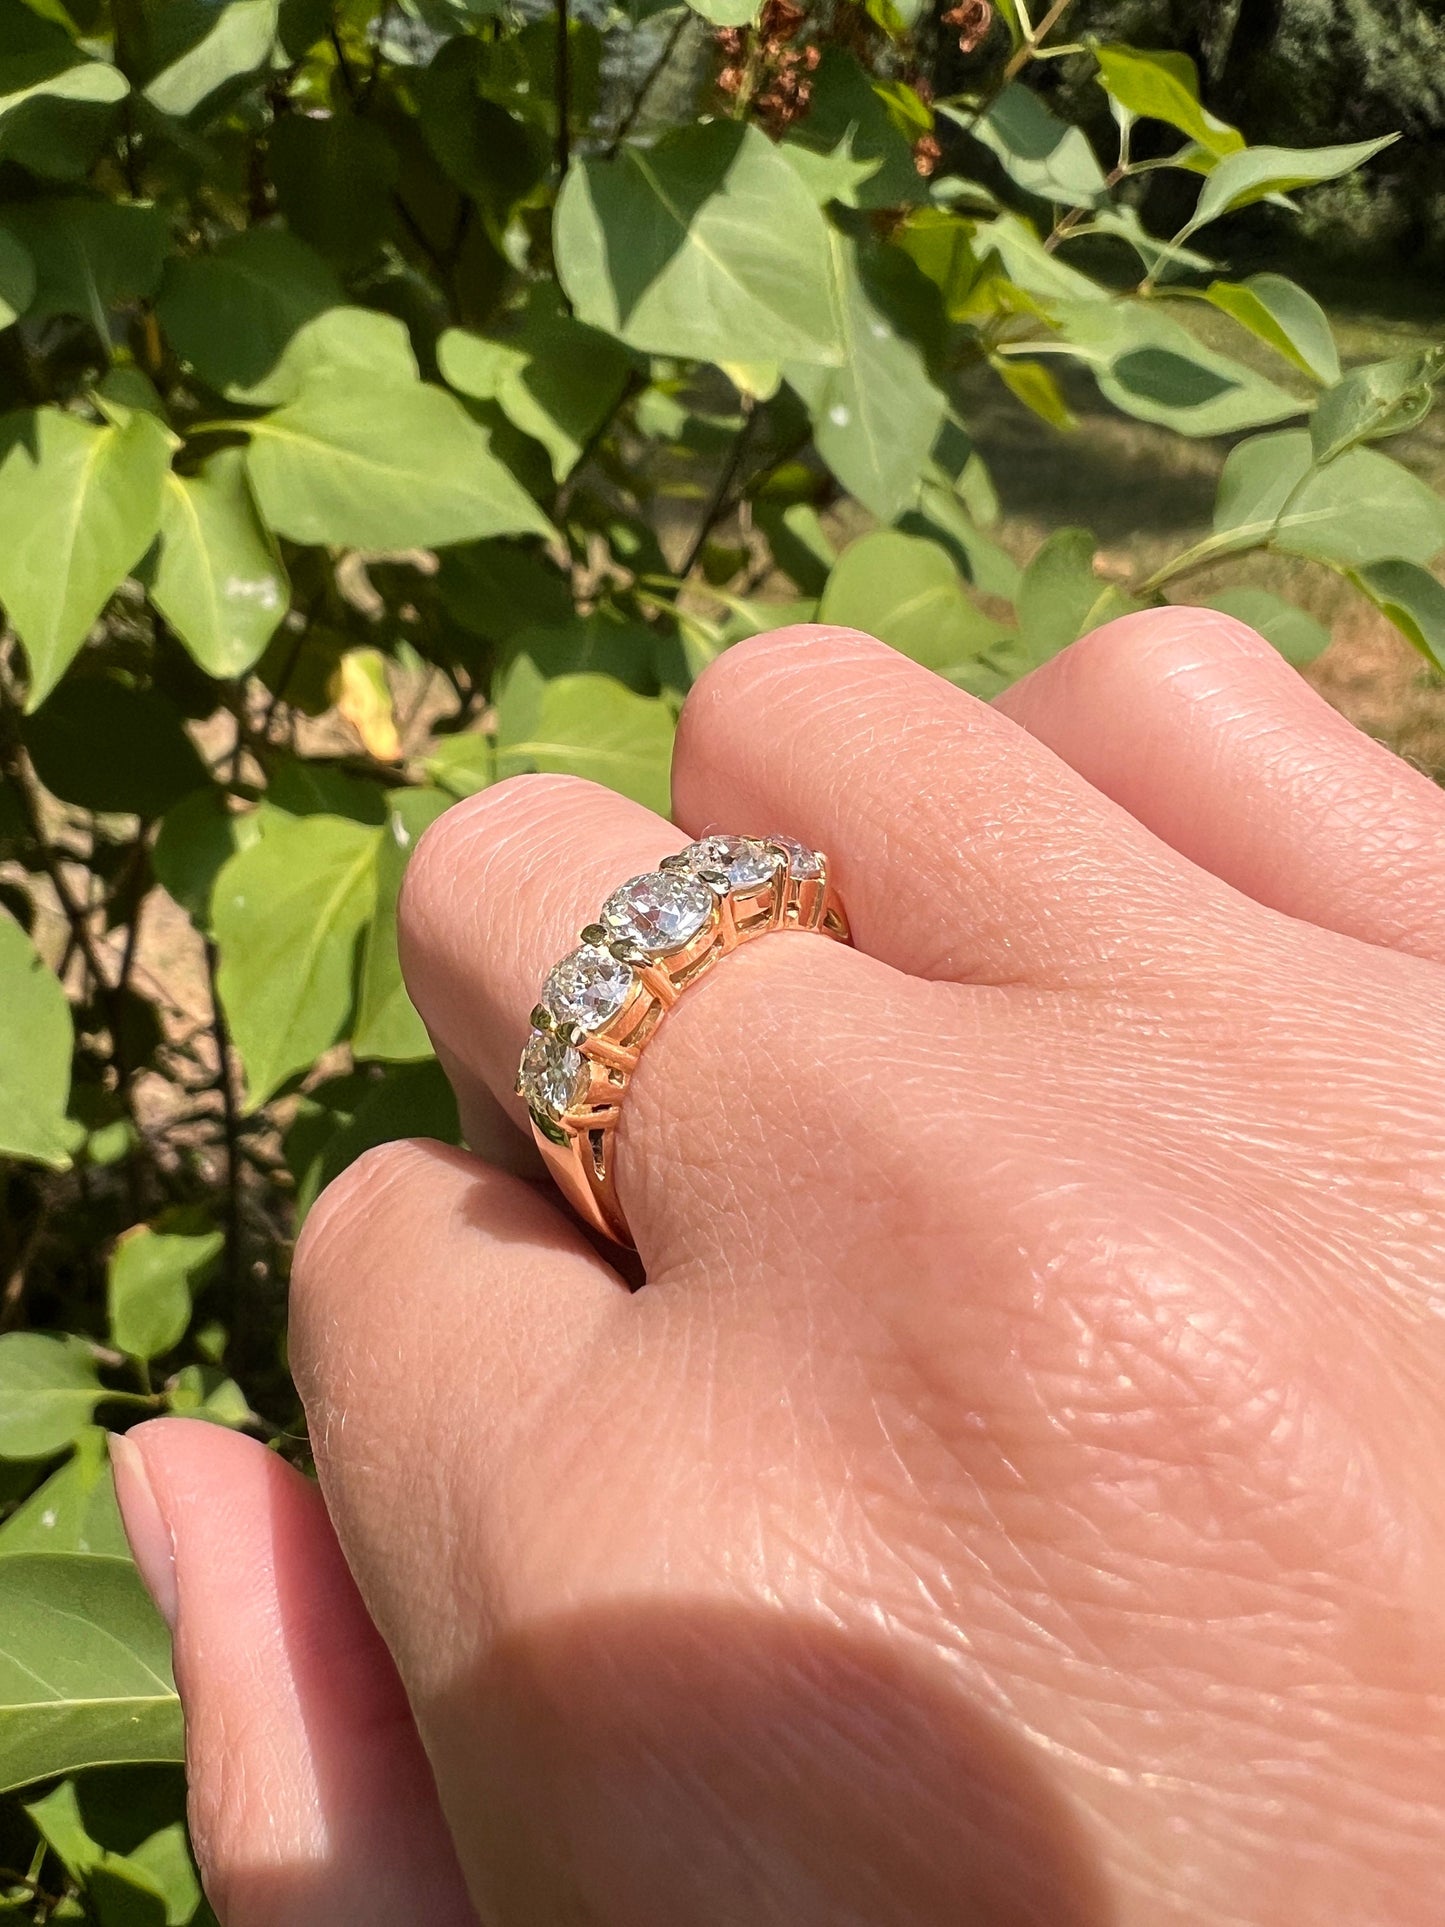 French Antique OMC 1.7 Carat Old Mine Cut DIAMOND 5 Five Stone Ring Chunky Band 4.9g 18k Gold Romantic Gift Stacker 1.7Ctw Sparkly Edwardian